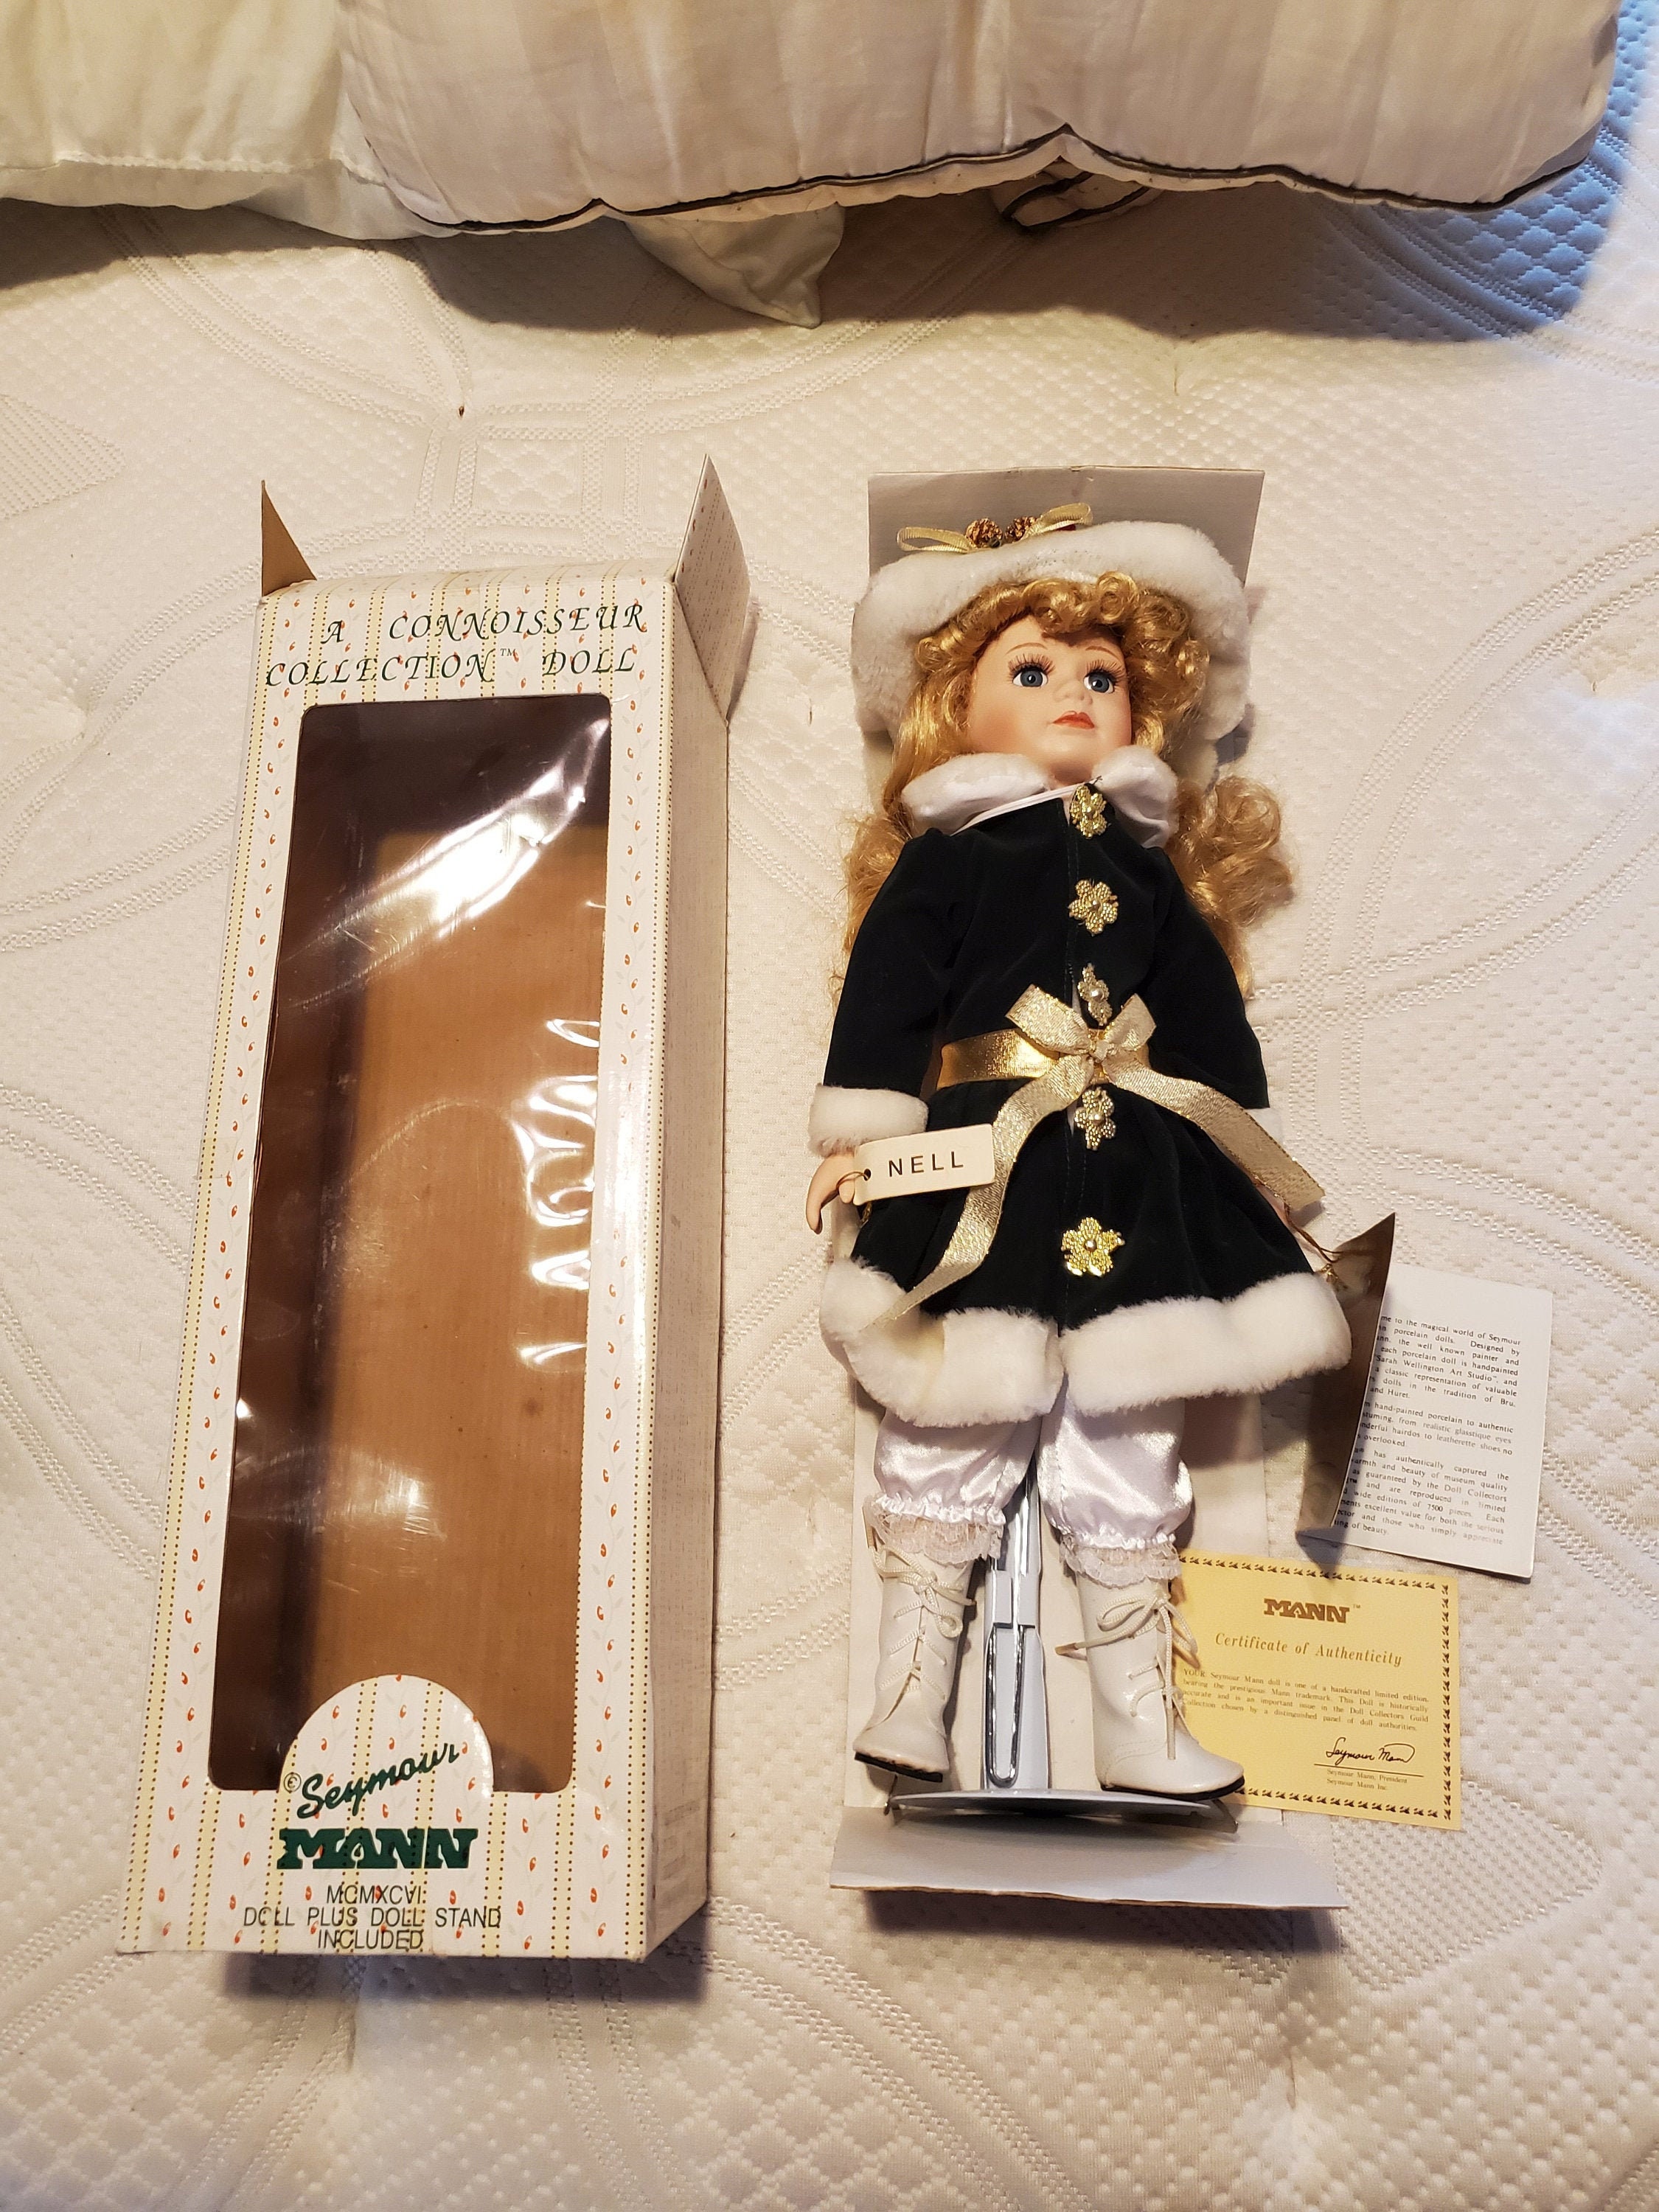 Seymour Mann Connoisseur Signature Series Collection Doll “Nell” – 1996